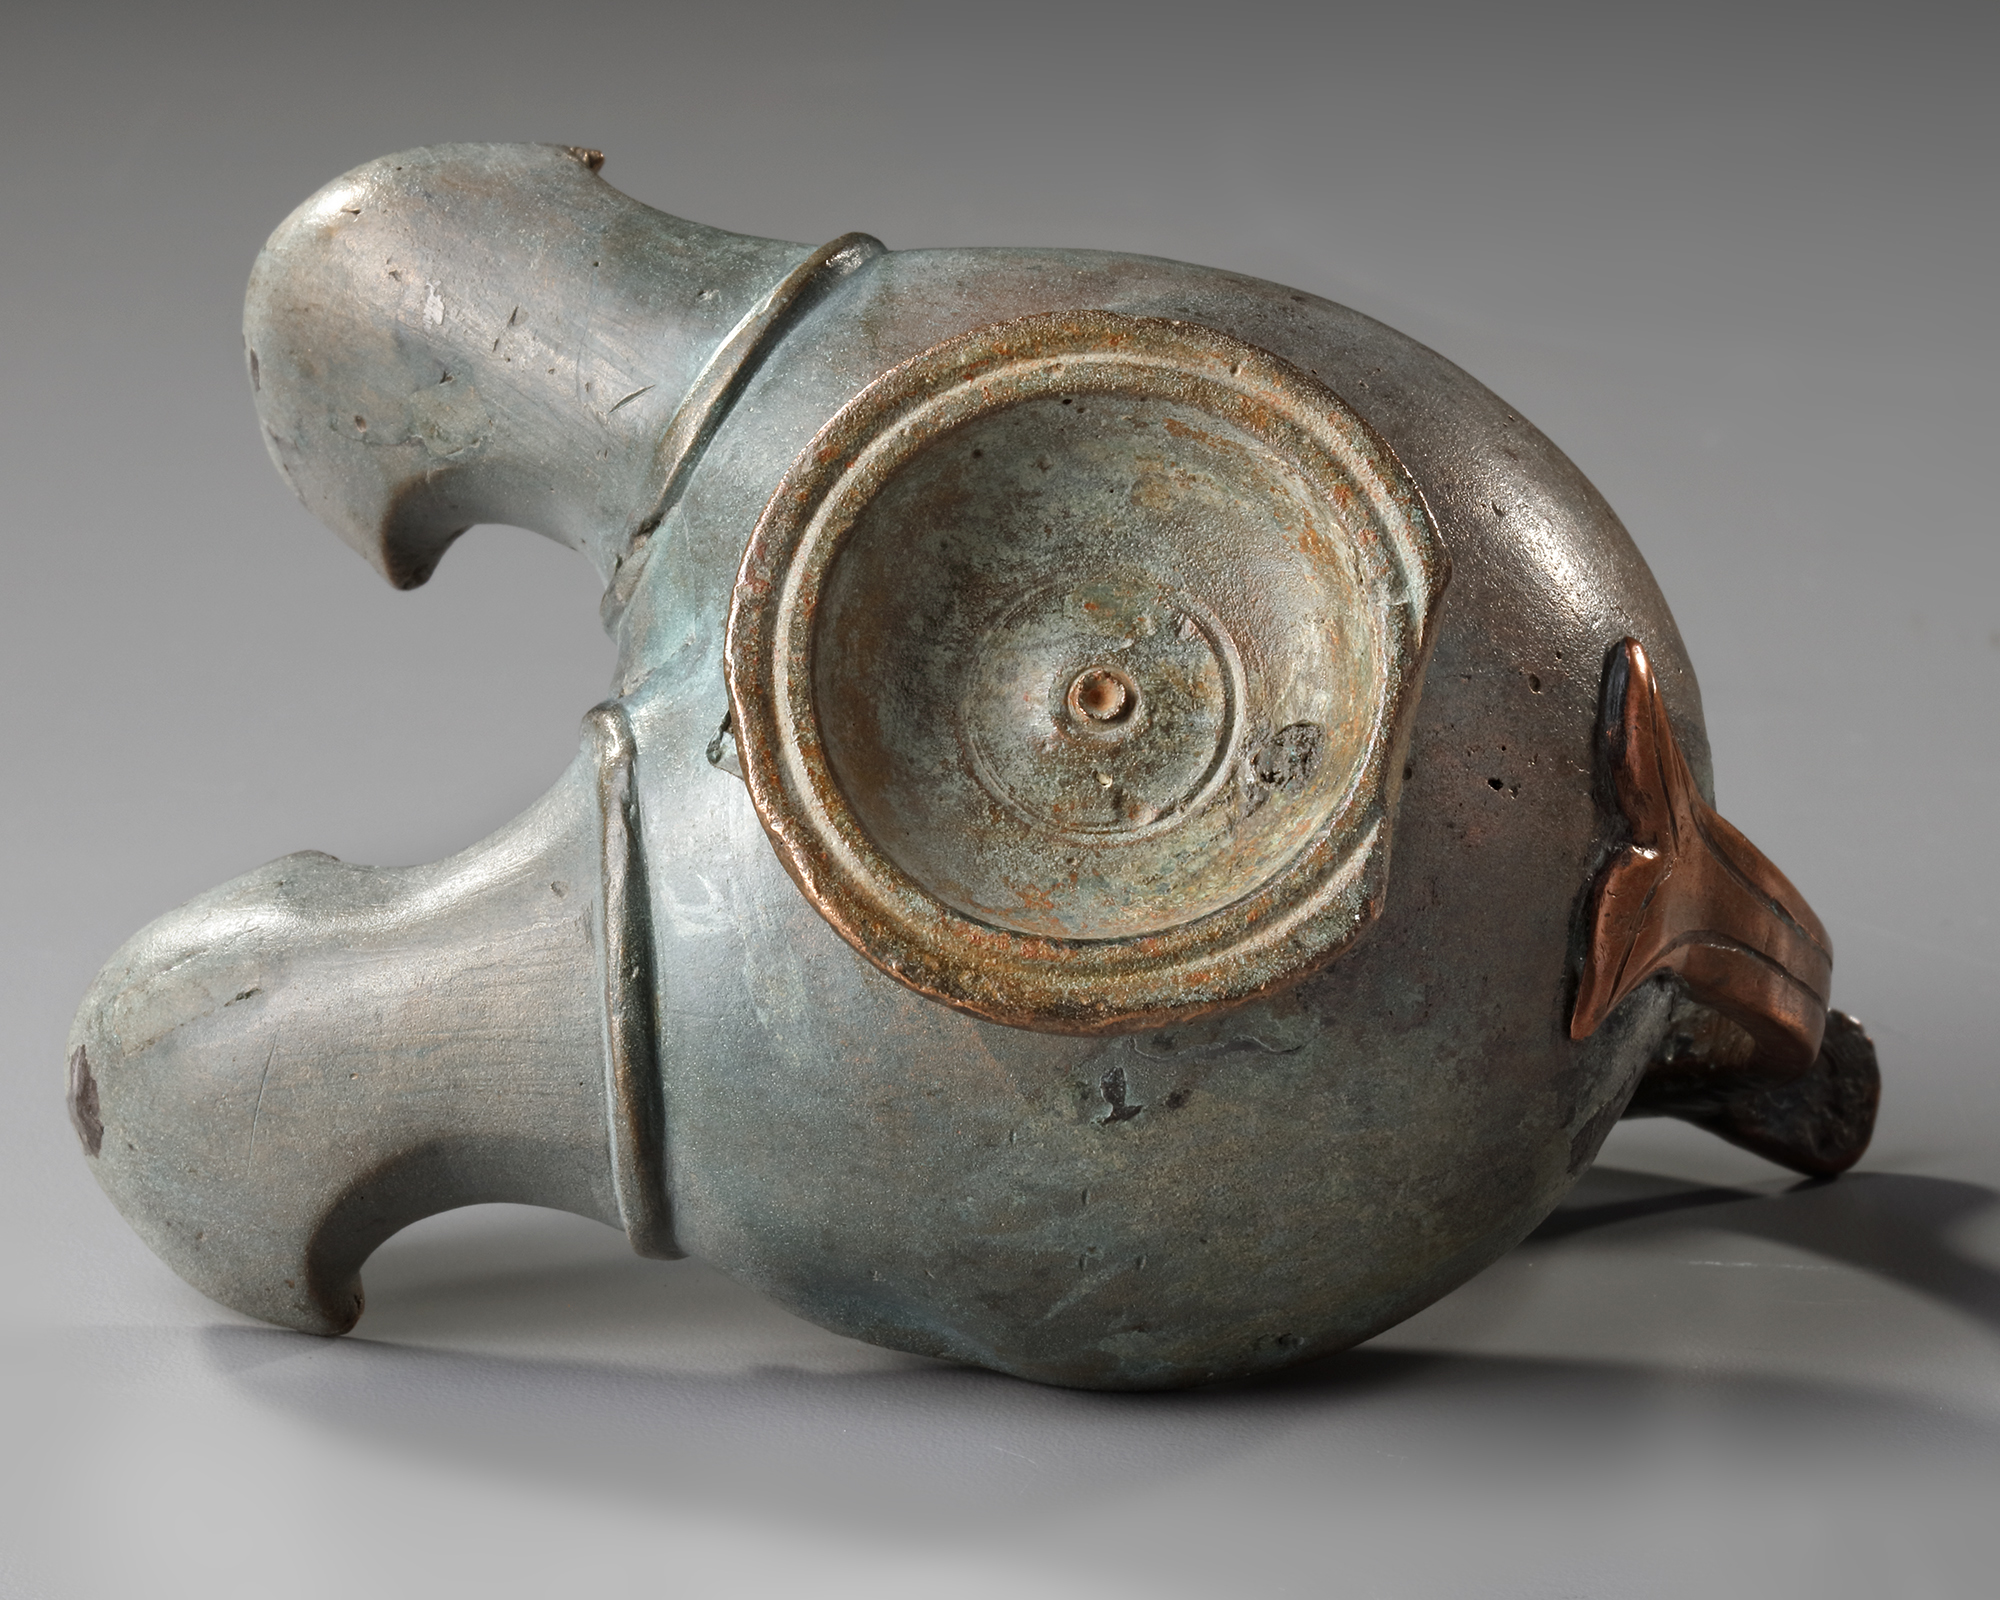 A ROMAN BRONZE OIL LAMP WITH DUCK HEAD, CIRCA 1ST-2ND CENTURY A.D. - Image 5 of 6